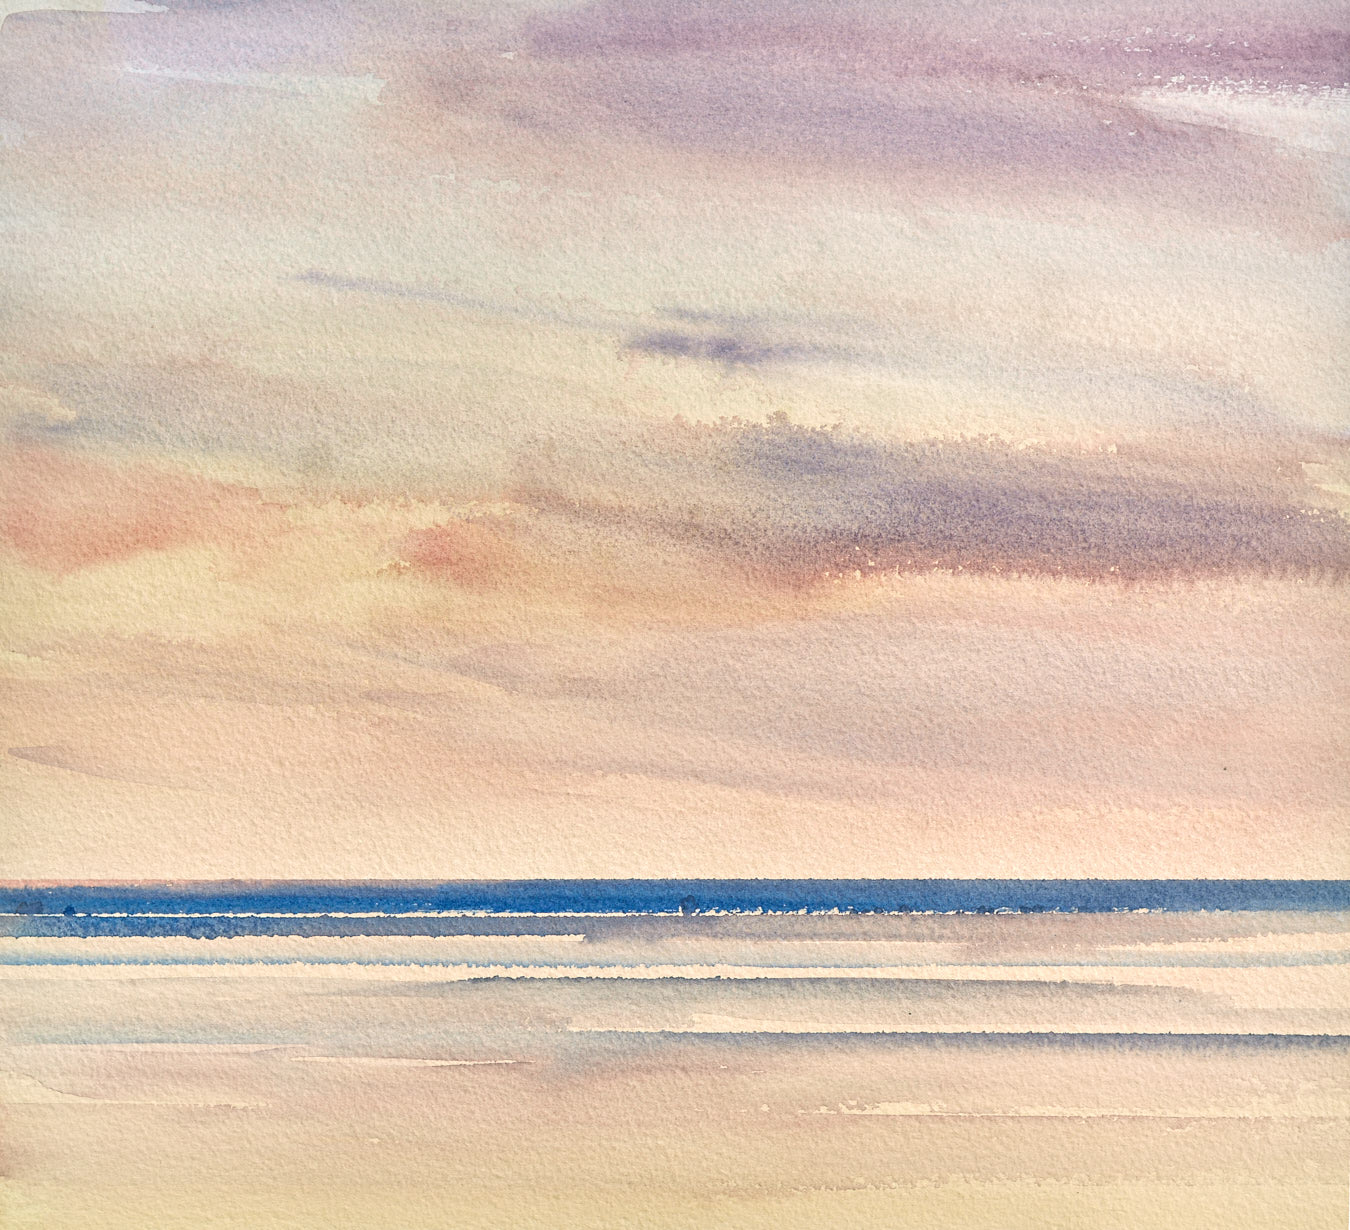 Large image of Sunset, St Annes-on-sea beach original watercolour painting